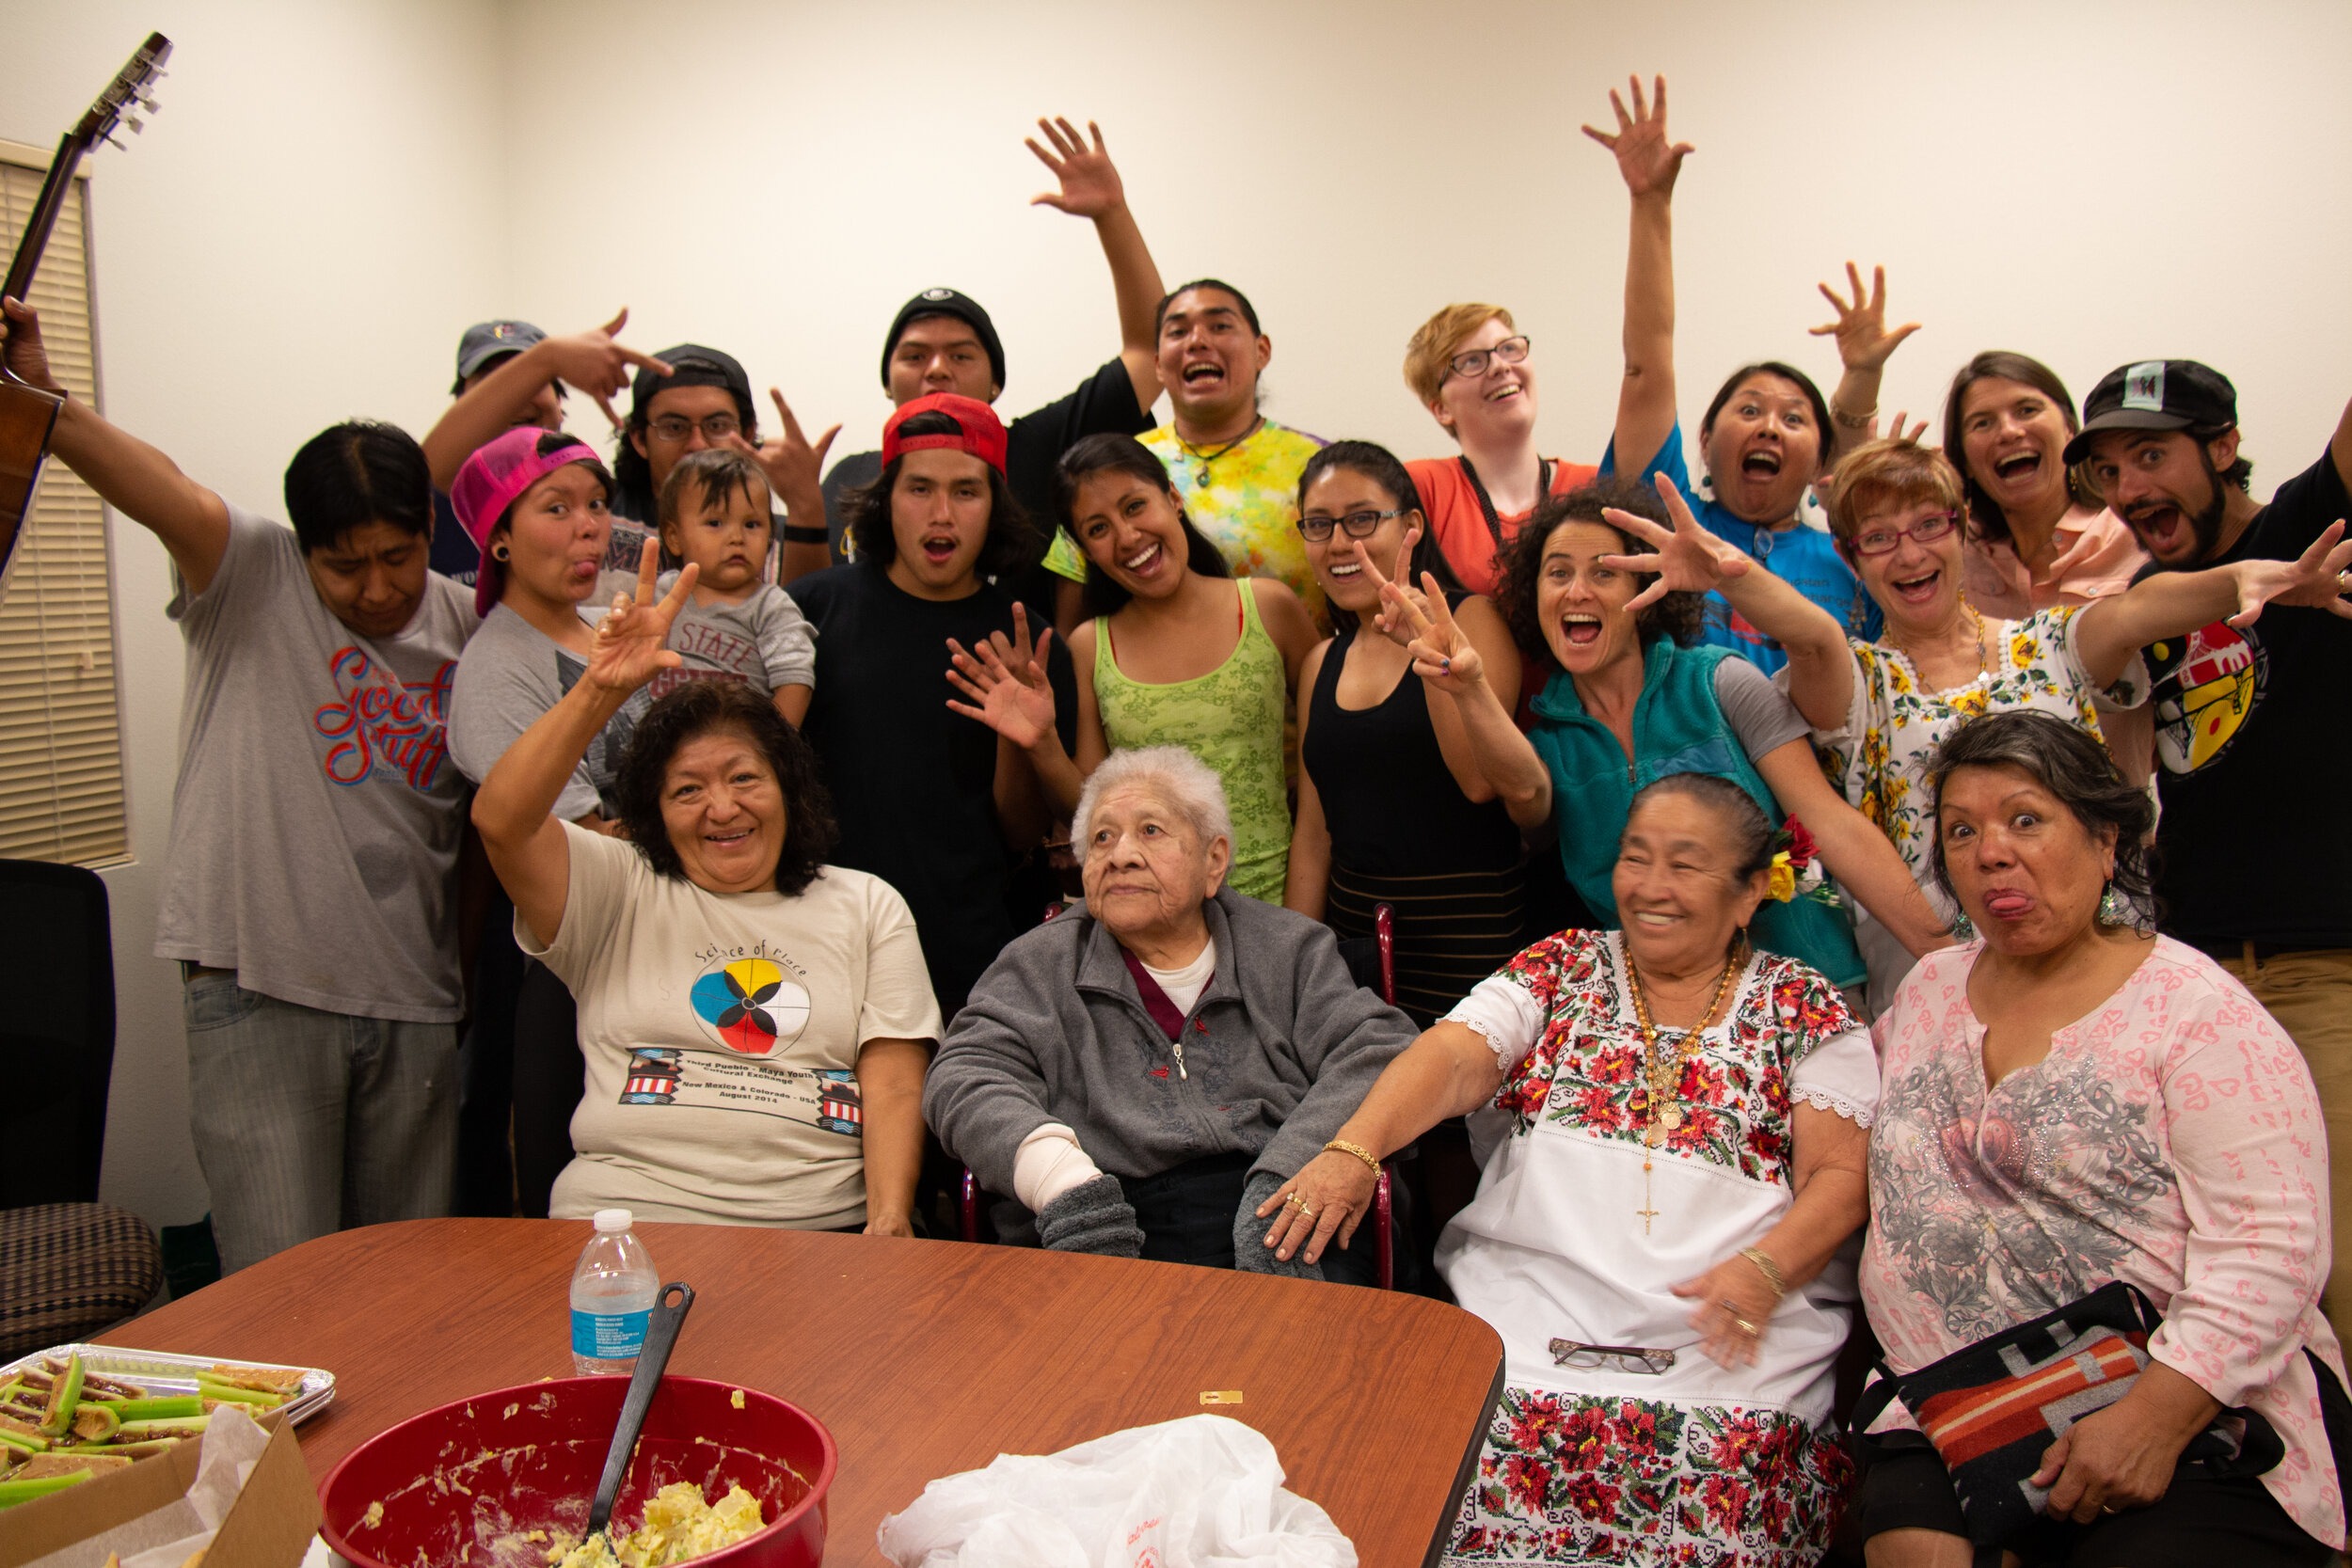  - Celebrating a job well done during the multimedia workshop, New Mexico, USA. (Photo Credit: Mateo Hinojosa, The Cultural Conservancy)